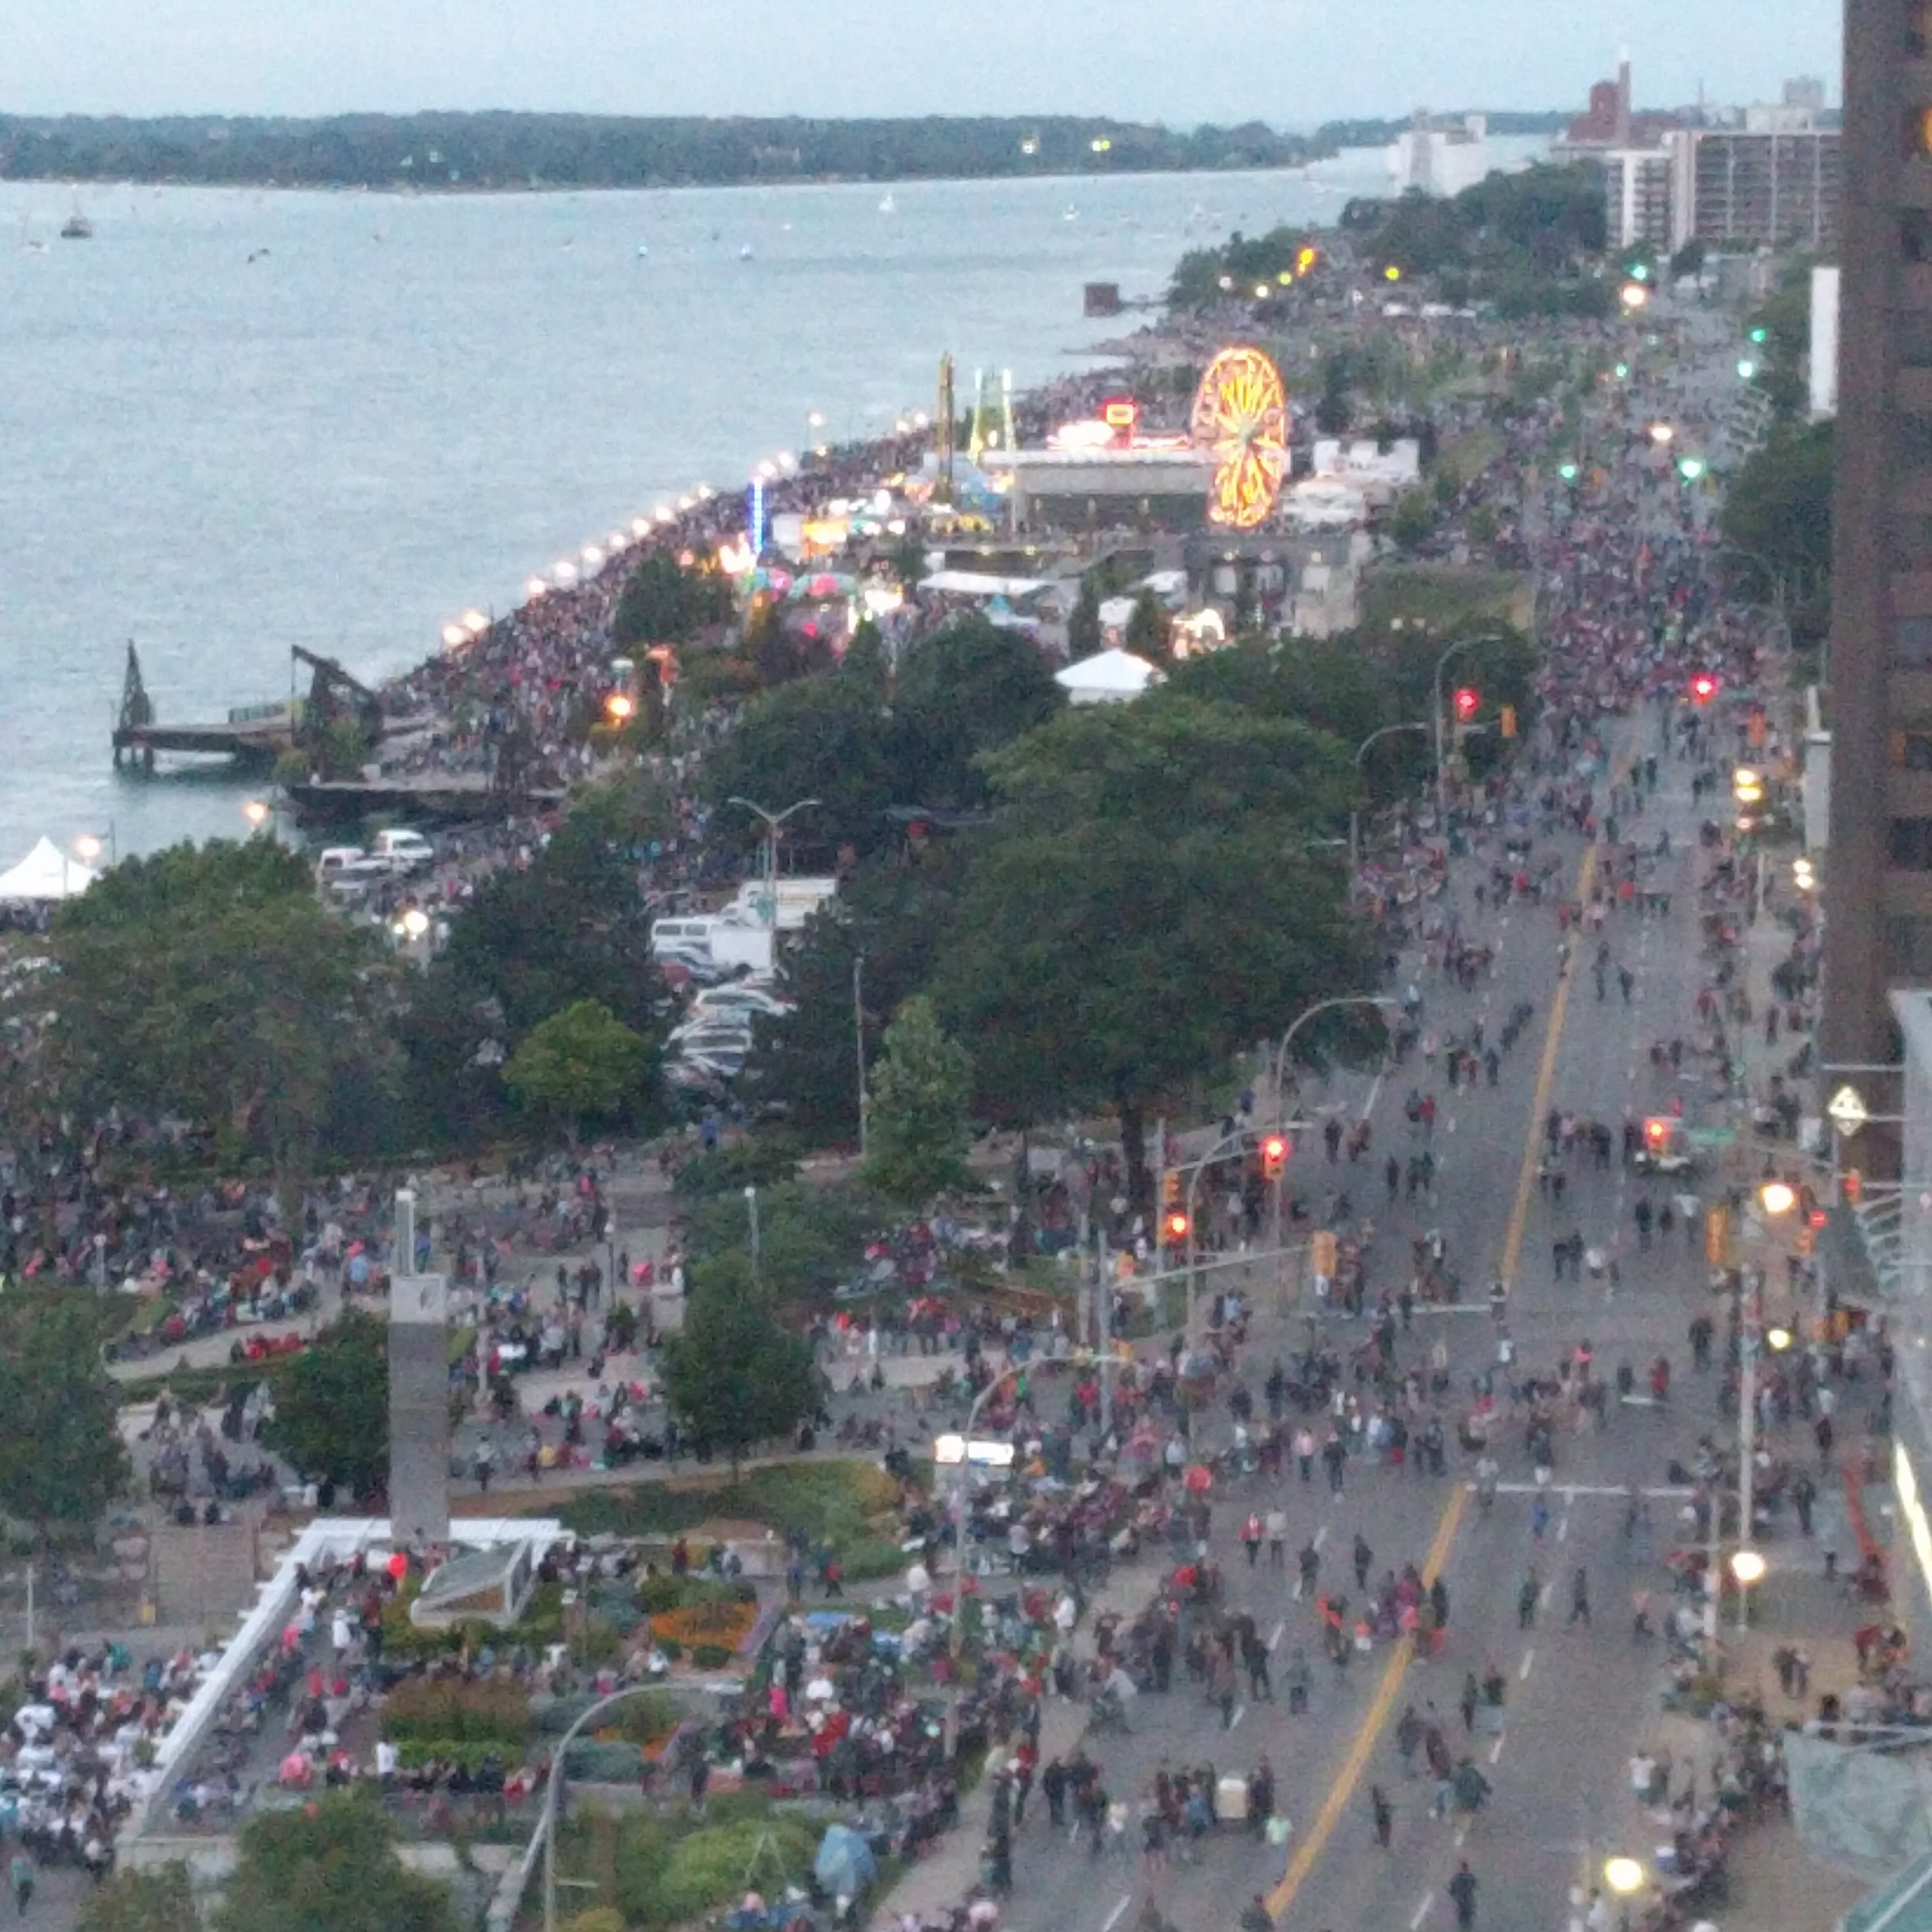 A terrible photo of downtown Windsor during the Freedom Day festivities